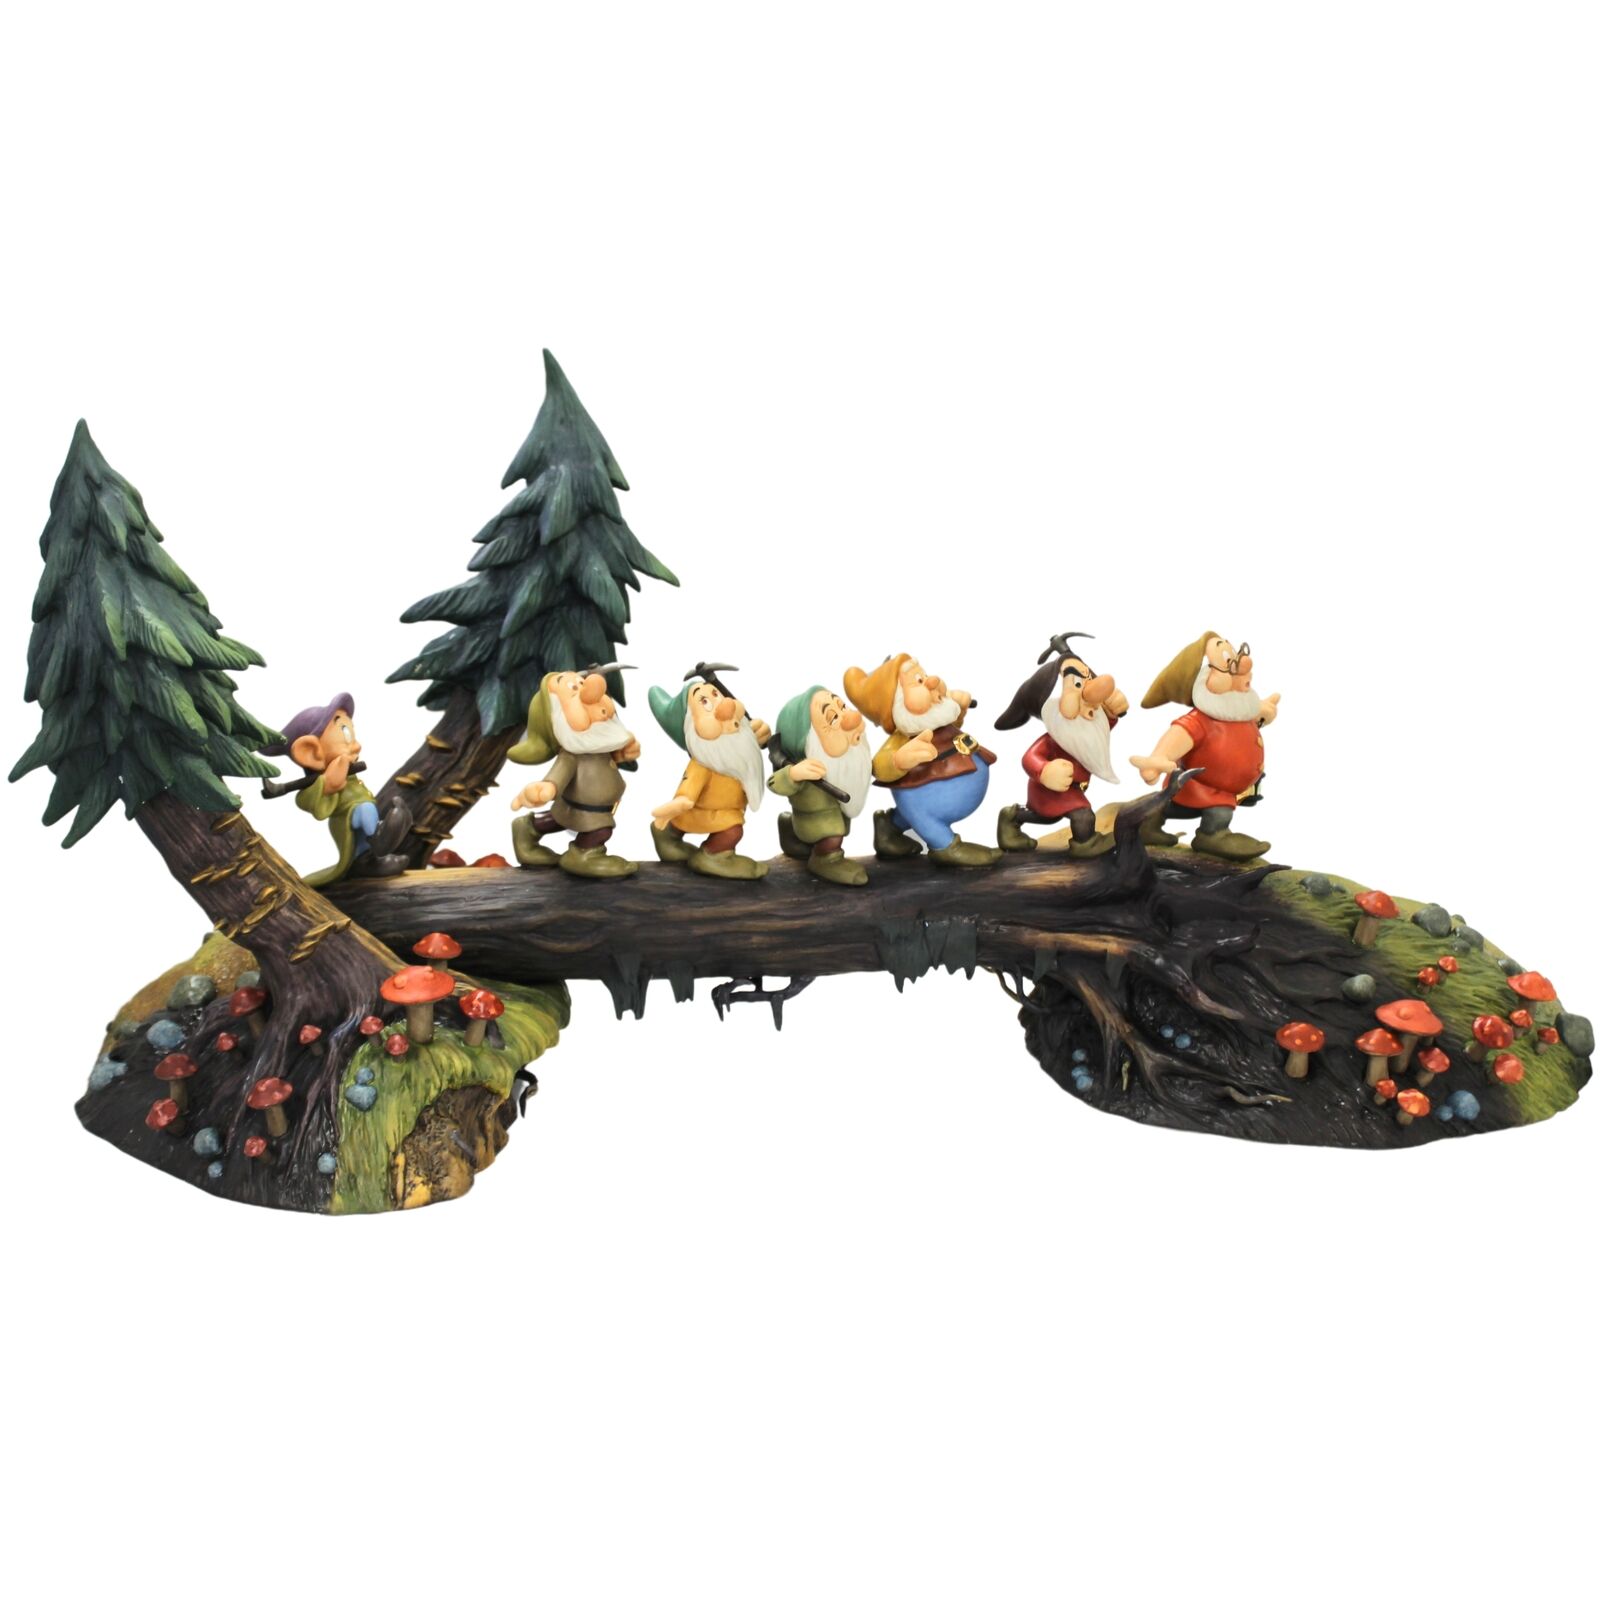 WDCC Heigh-Ho It's Home from Work We Go | Snow White | Limited 750 | New in Box